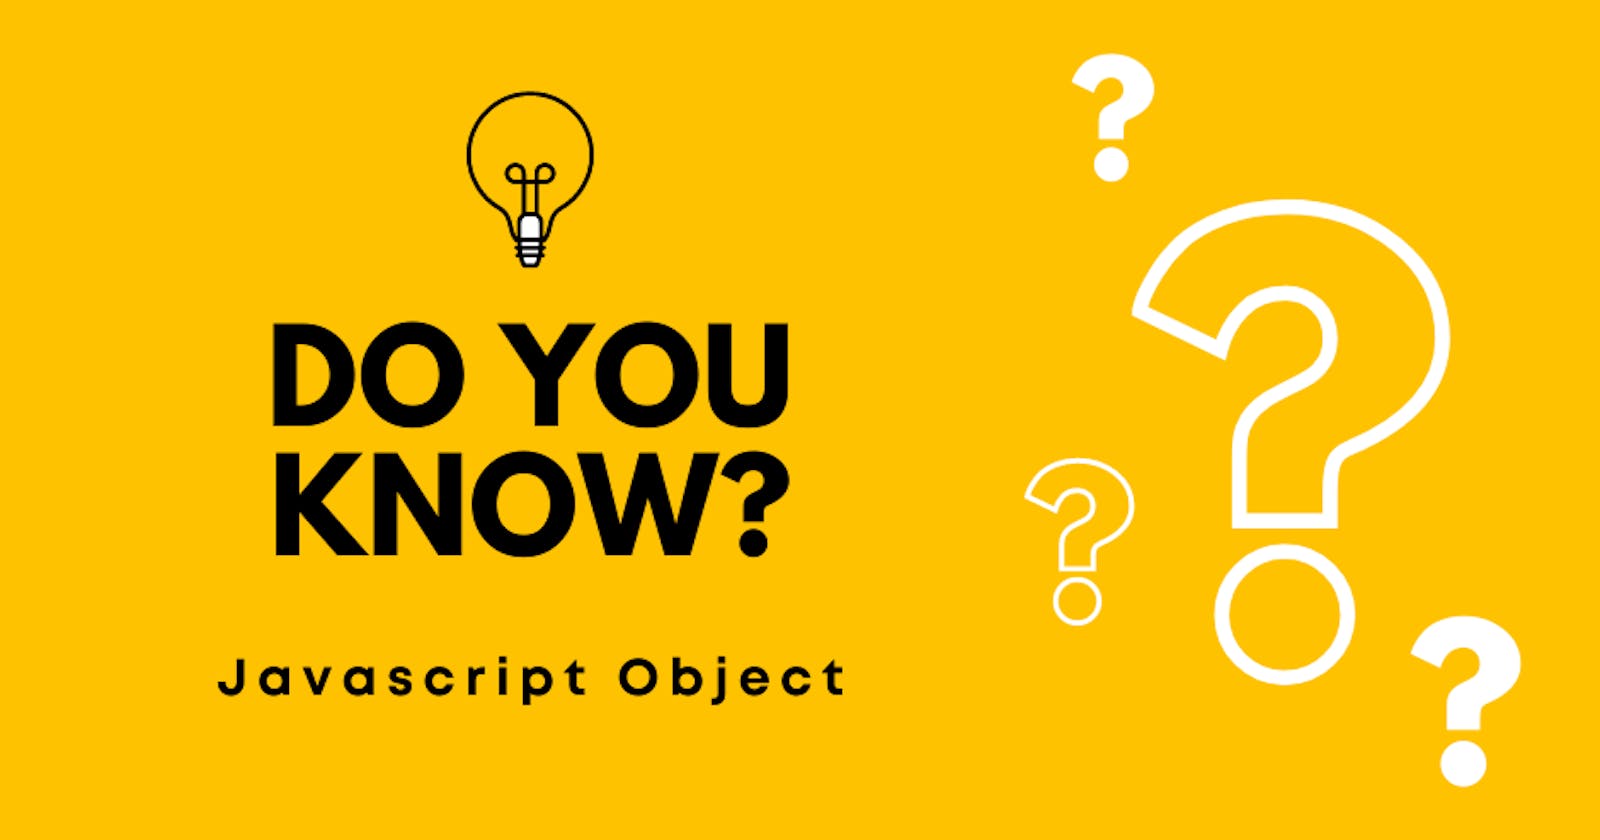 An Ultimate Guide About Javascript Object